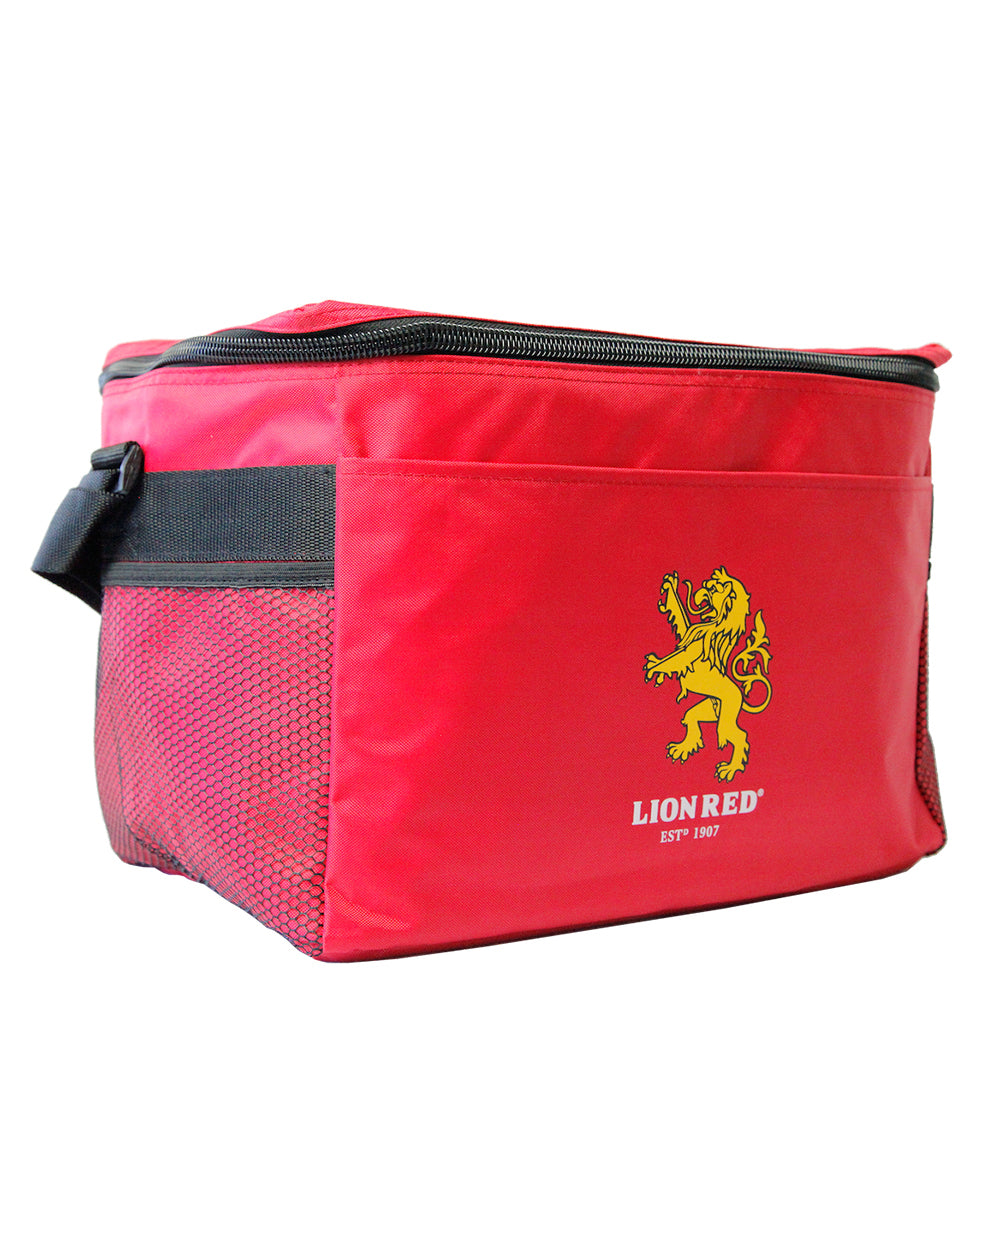 Lion Red Cooler Bag 24 -  Beer Gear Apparel & Merchandise - Speights - Lion Red - VB - Tokyo Dy merch